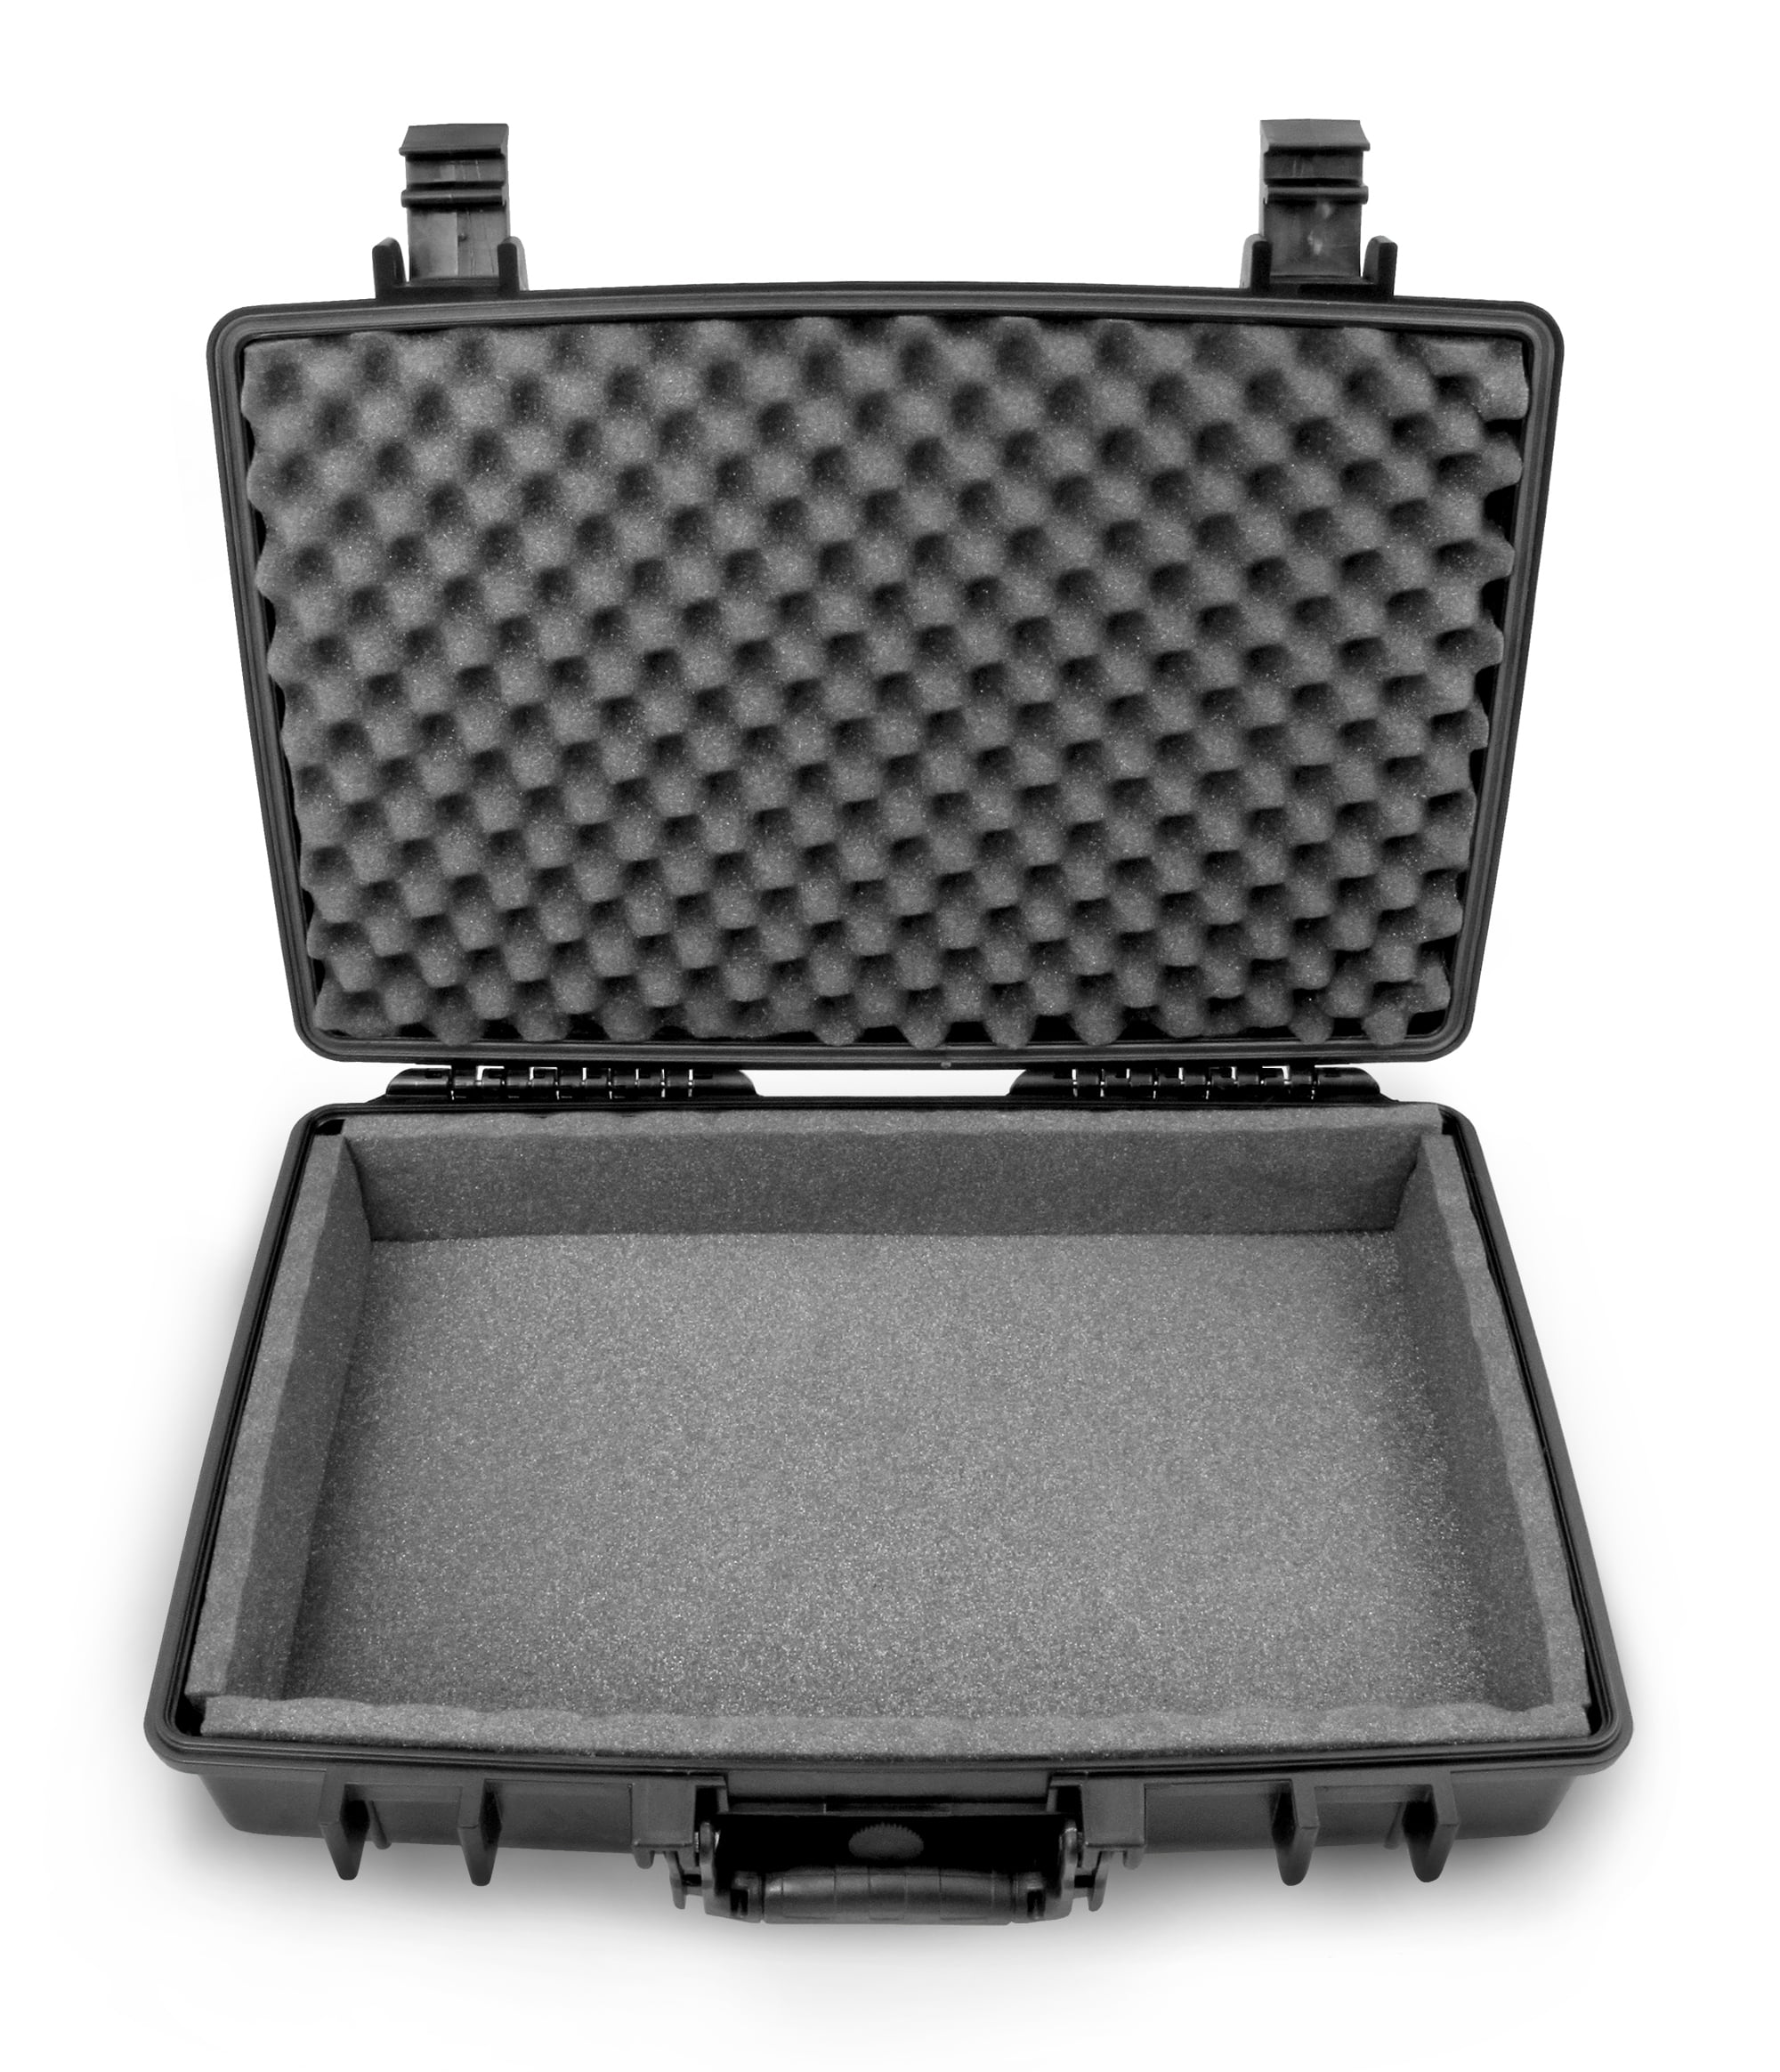 Synthesizer and Mixer Case with Foam Compatible with MC-707 MPC Live MPD232 TR-8 APC40 MKII and Accessories MX-1 Peak Casematix Elite Rugged Pad TR-8S 